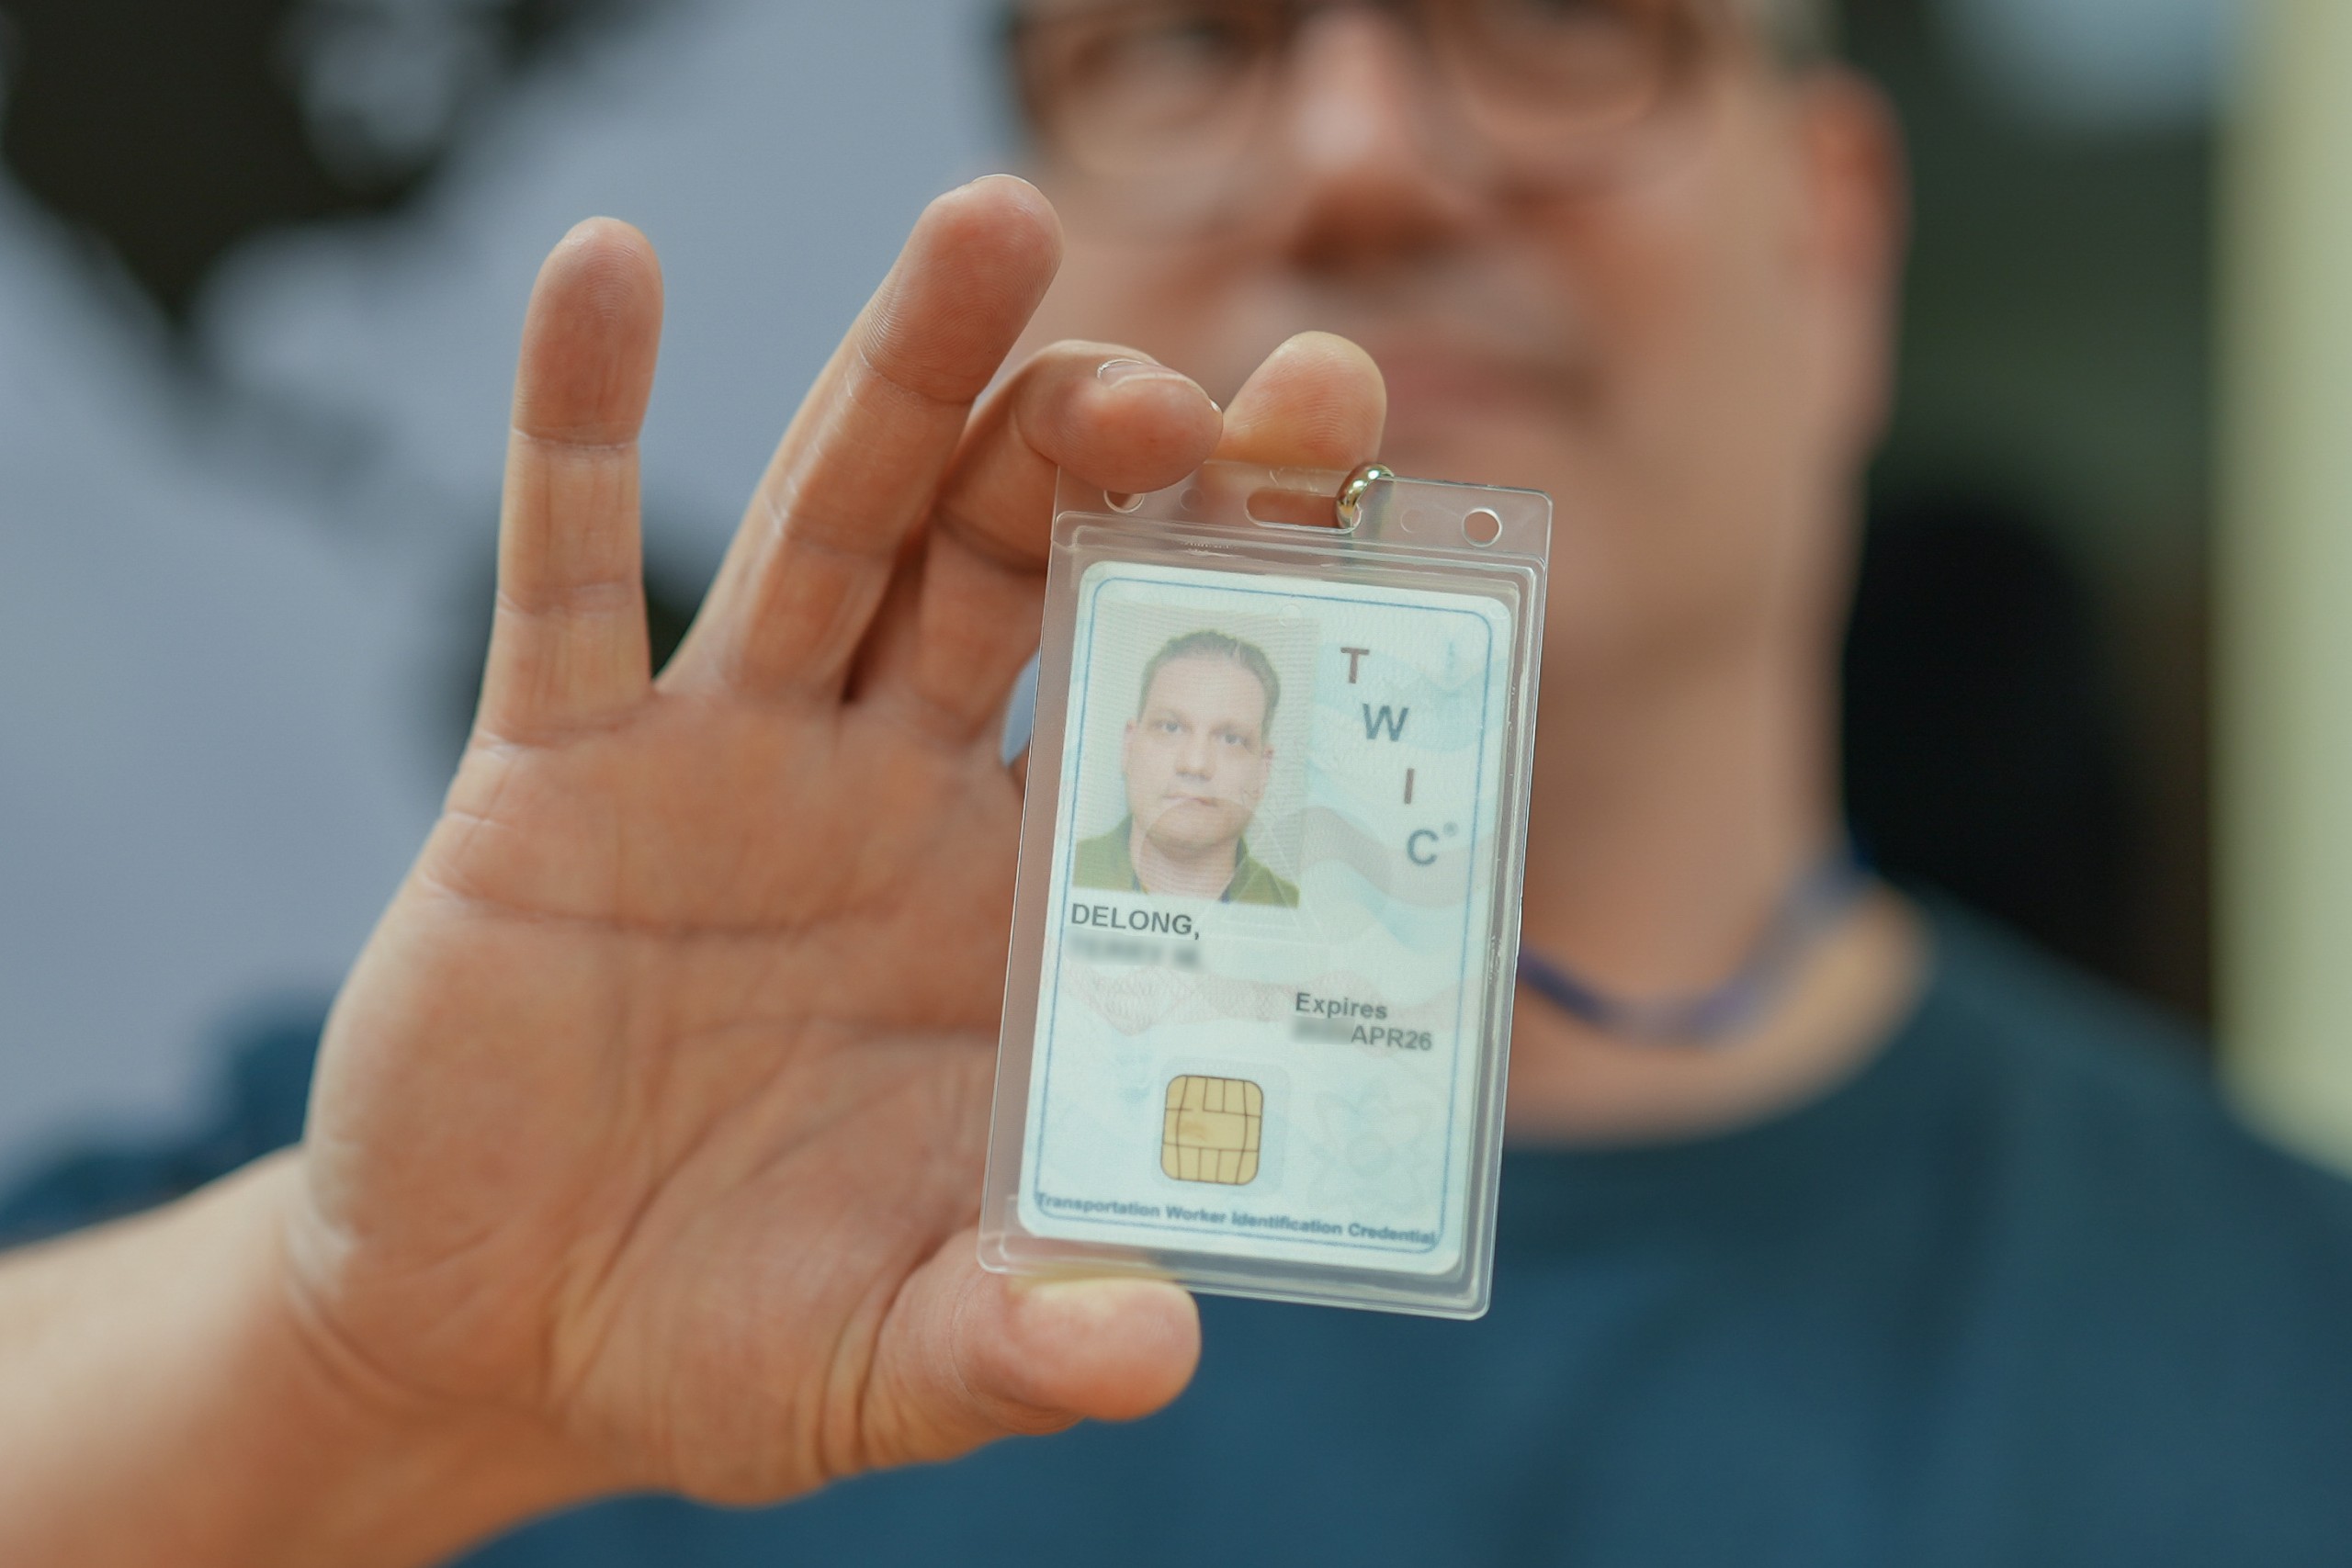 How to Get a TWIC Card for Truck Drivers: Requirements, Cost 2023